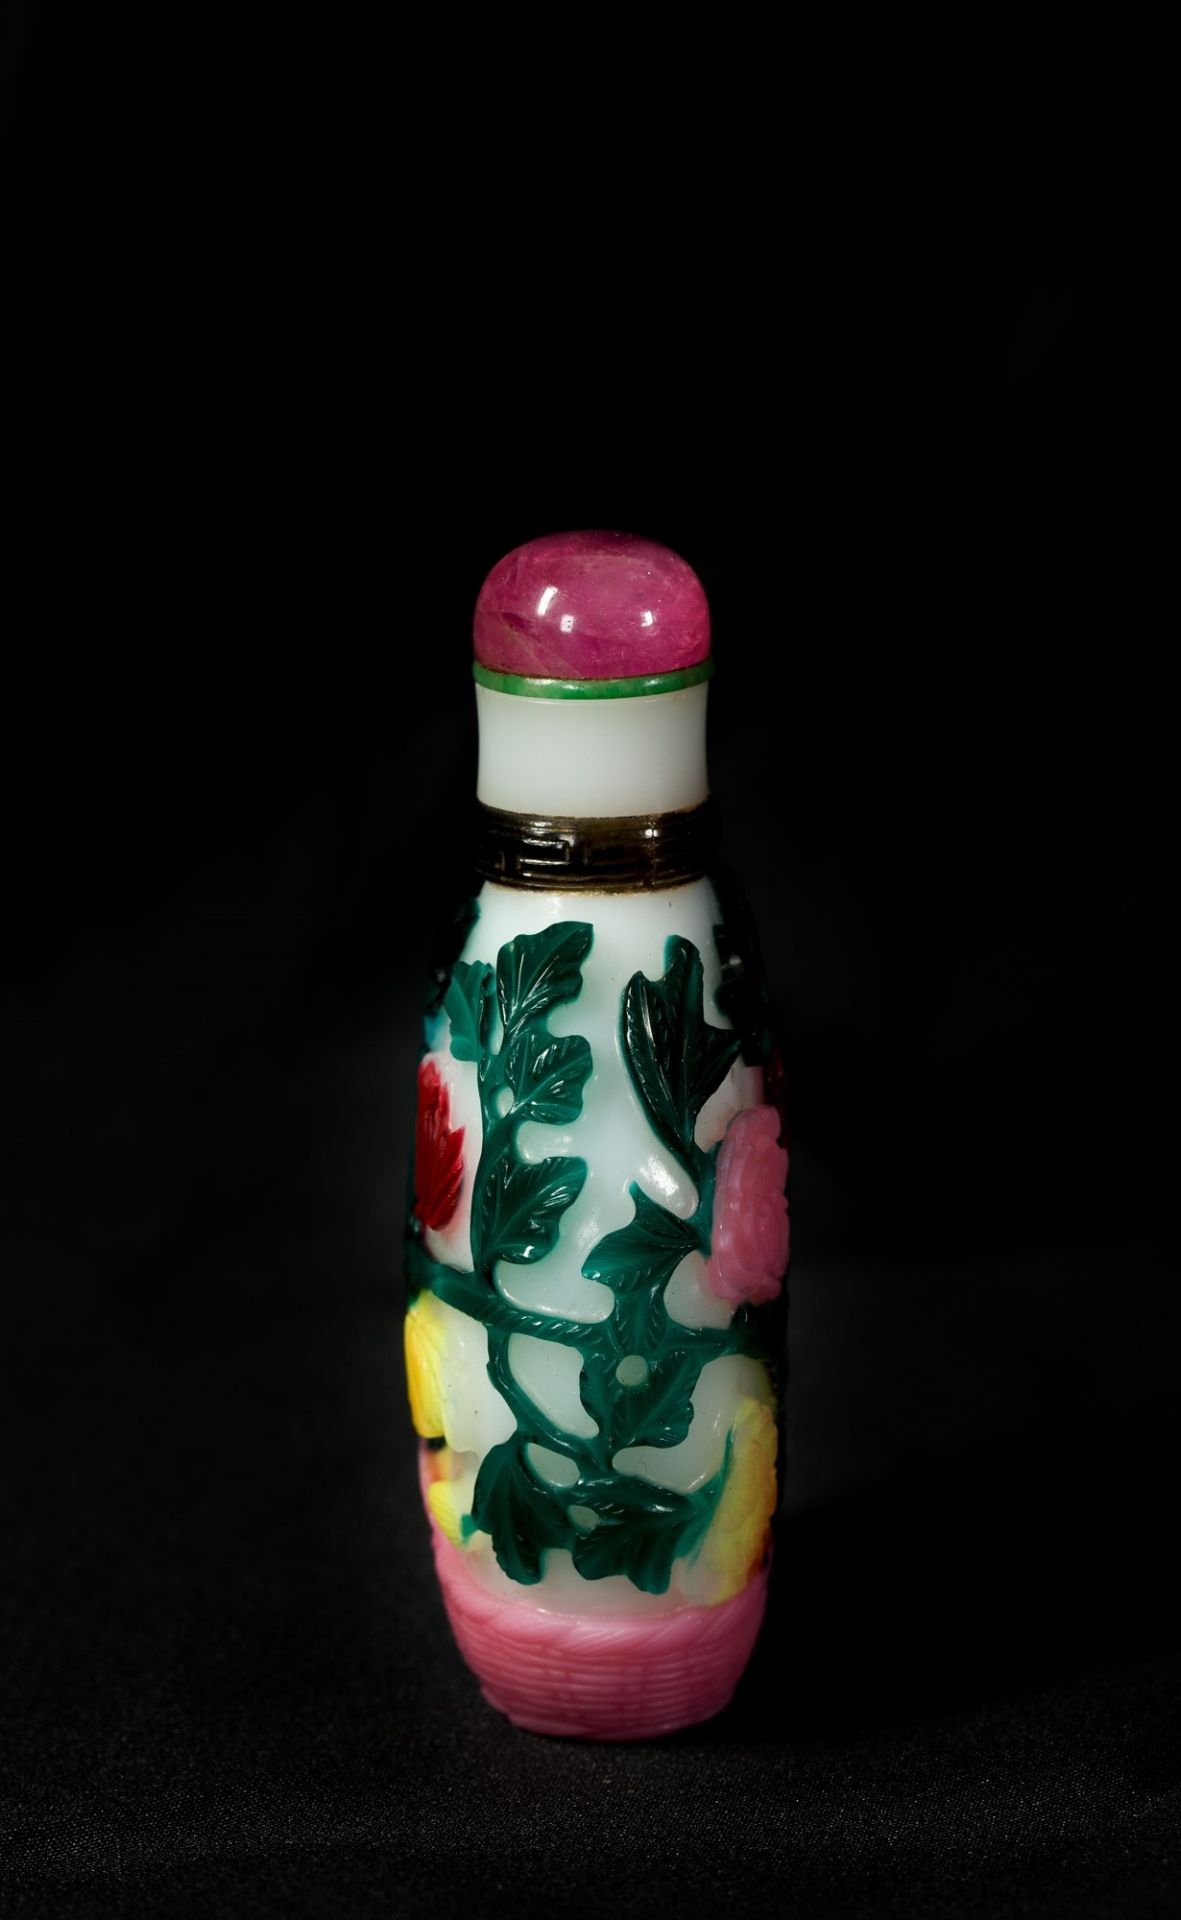 A RARE SEVEN COLOUR GLASS OVERLAY SNUFF BOTTLE h. 8 cm - Image 4 of 5